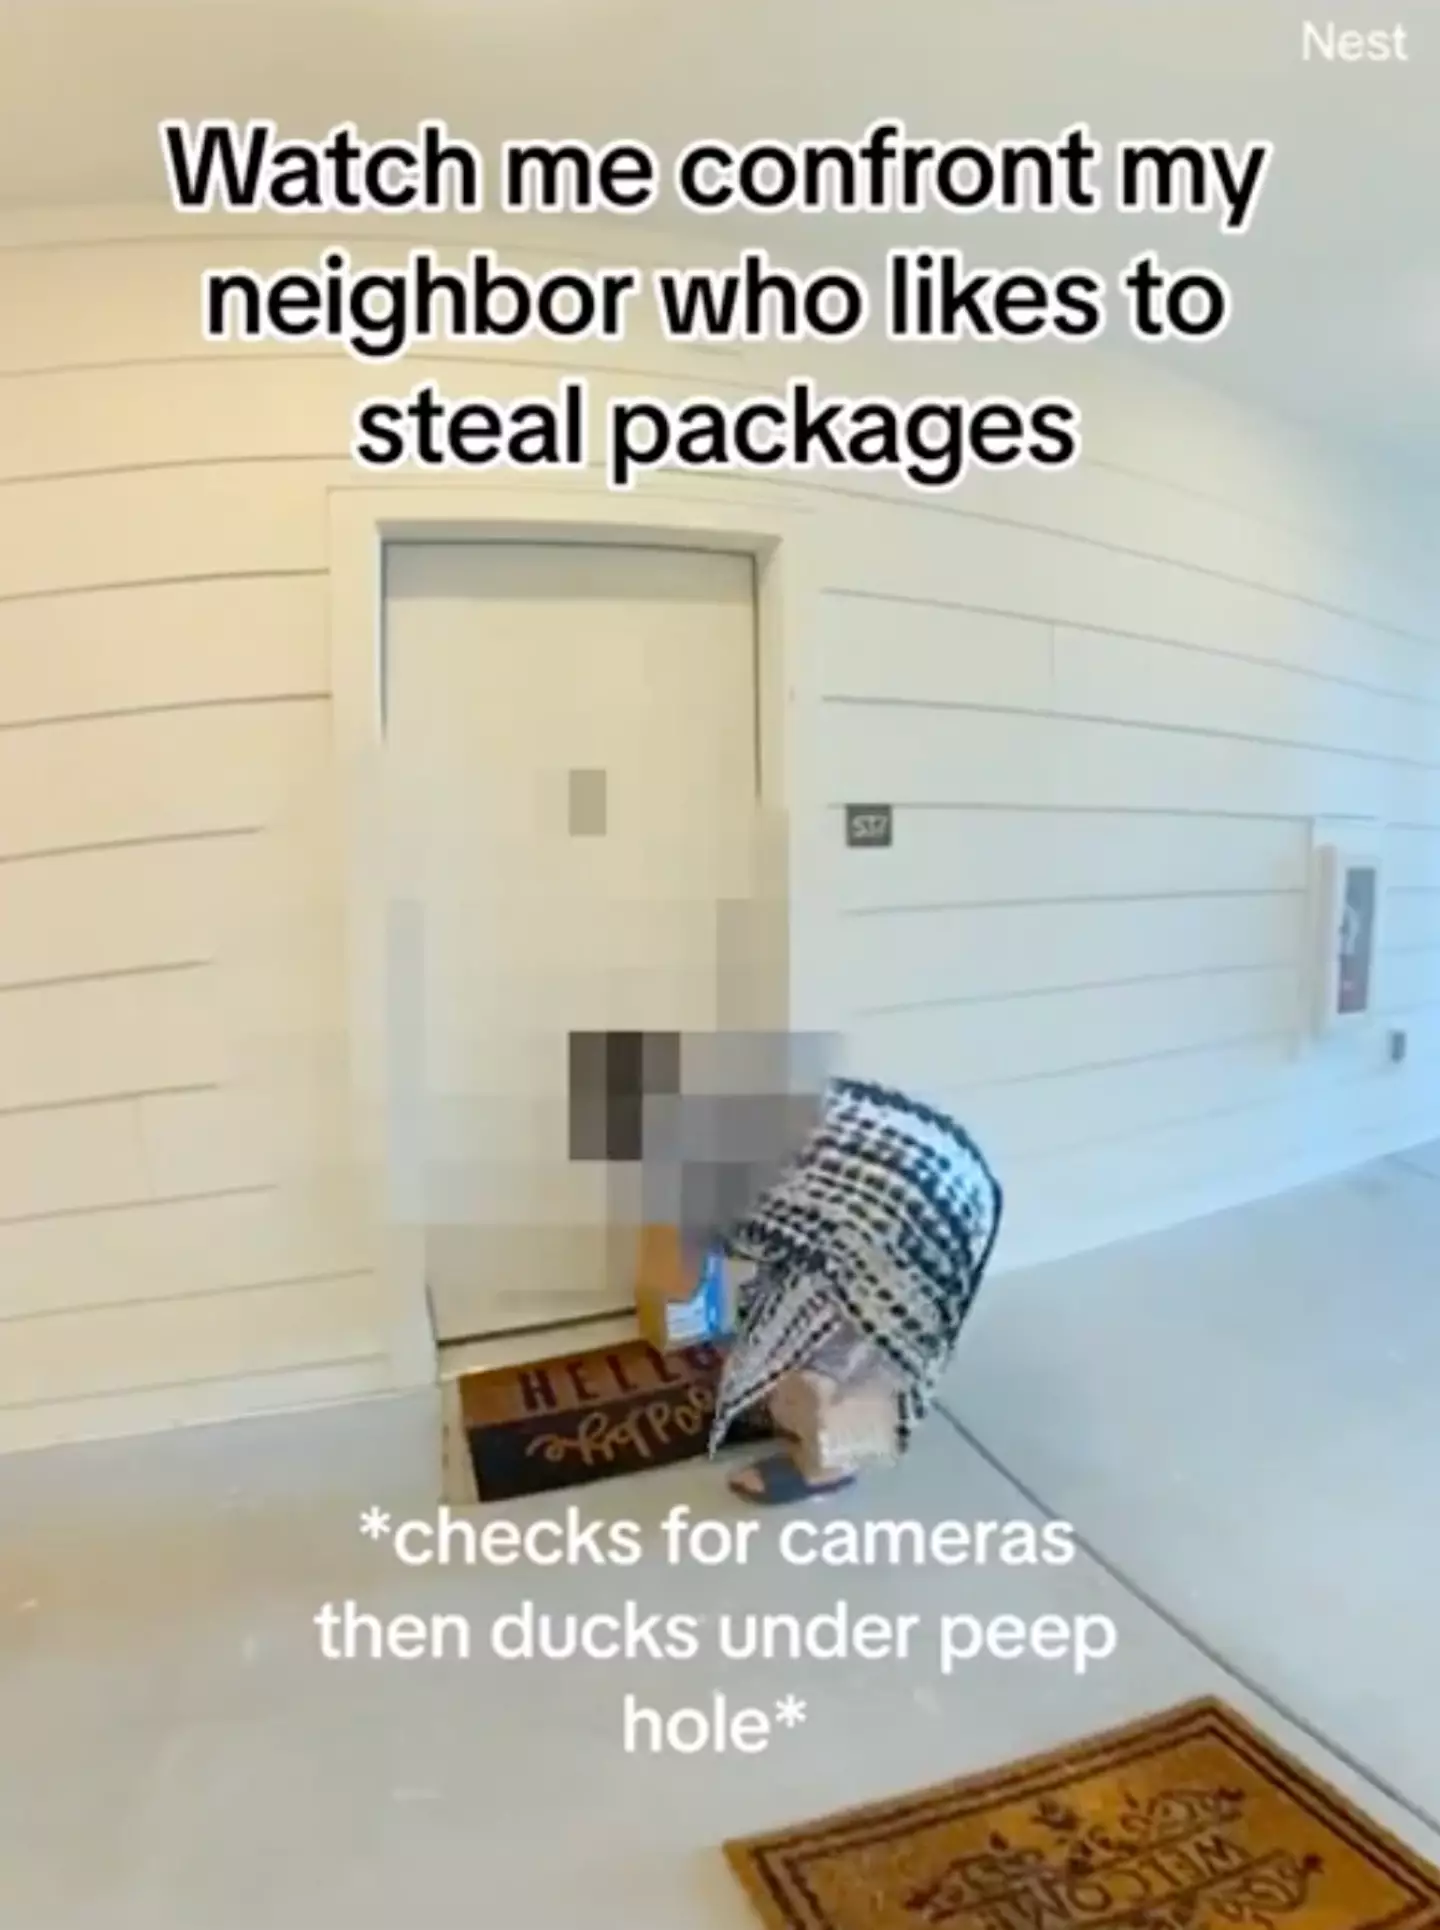 The woman approaches Kennady's door before walking away, to only return moments later, snatching the parcel and scarpering off.